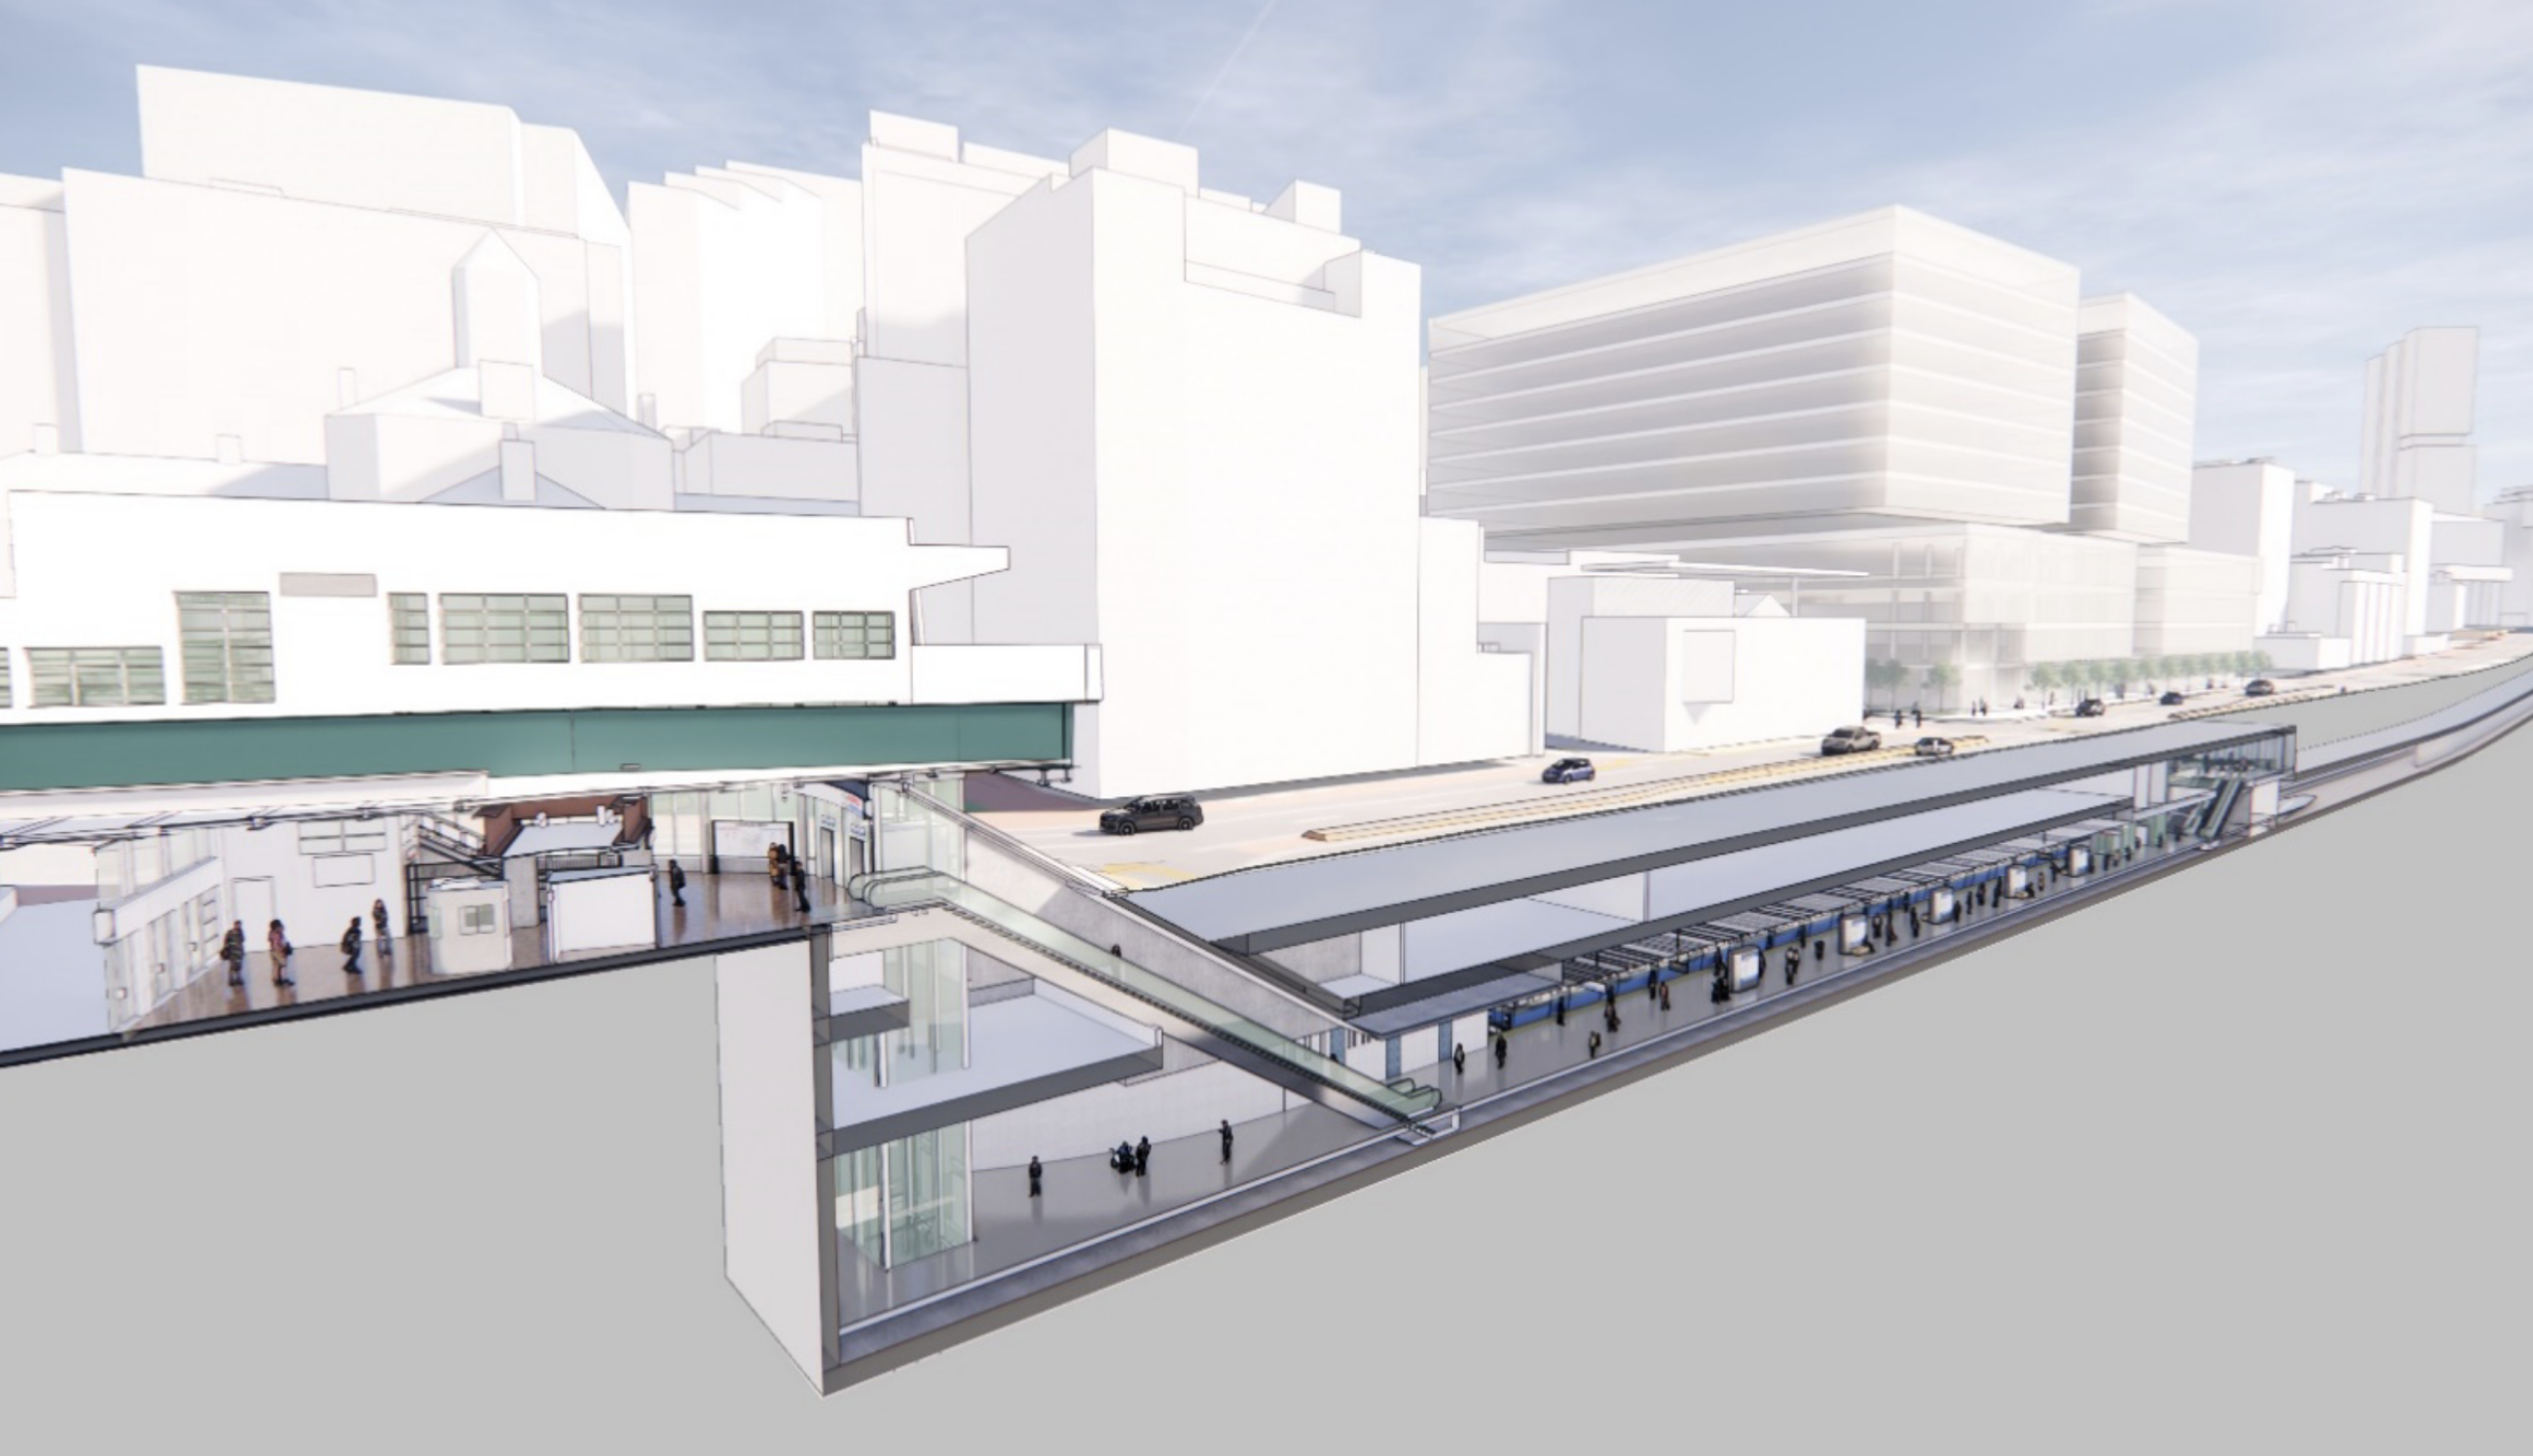 A cutaway view of the new Charles/MGH subway station under Cambridge Street. The existing Red Line station above Charles Circle is visible at left; the proposed new Mass. General Hospital building, in the background at right, would provide a second entry point at the other end of the station. Courtesy of the MBTA.